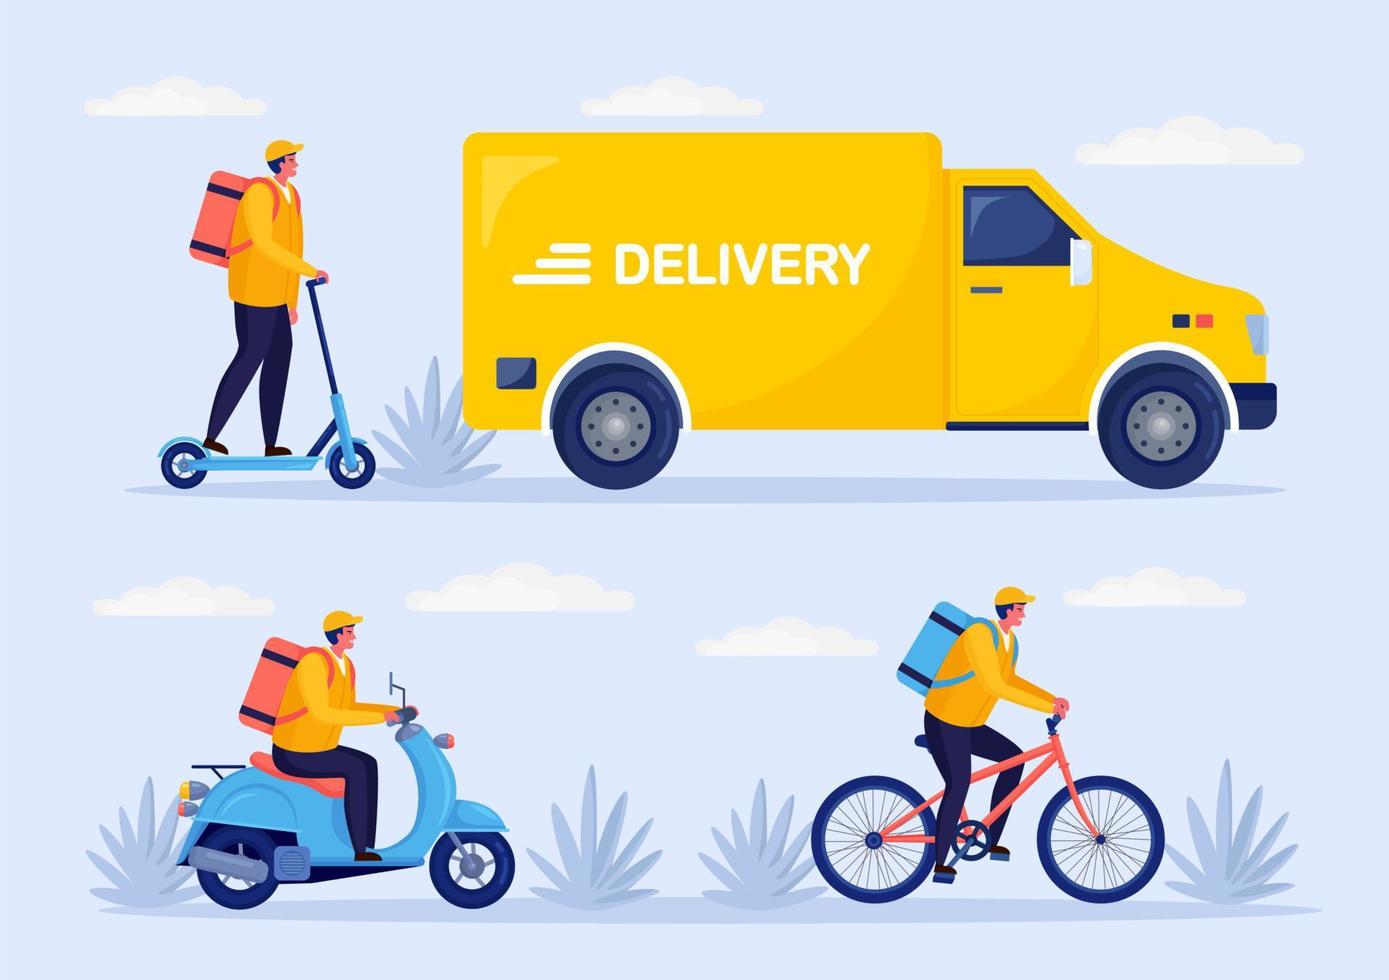 Free fast delivery service by bicycle, scooter, kick scooter, truck, van. Courier delivers food order by auto. Vector design